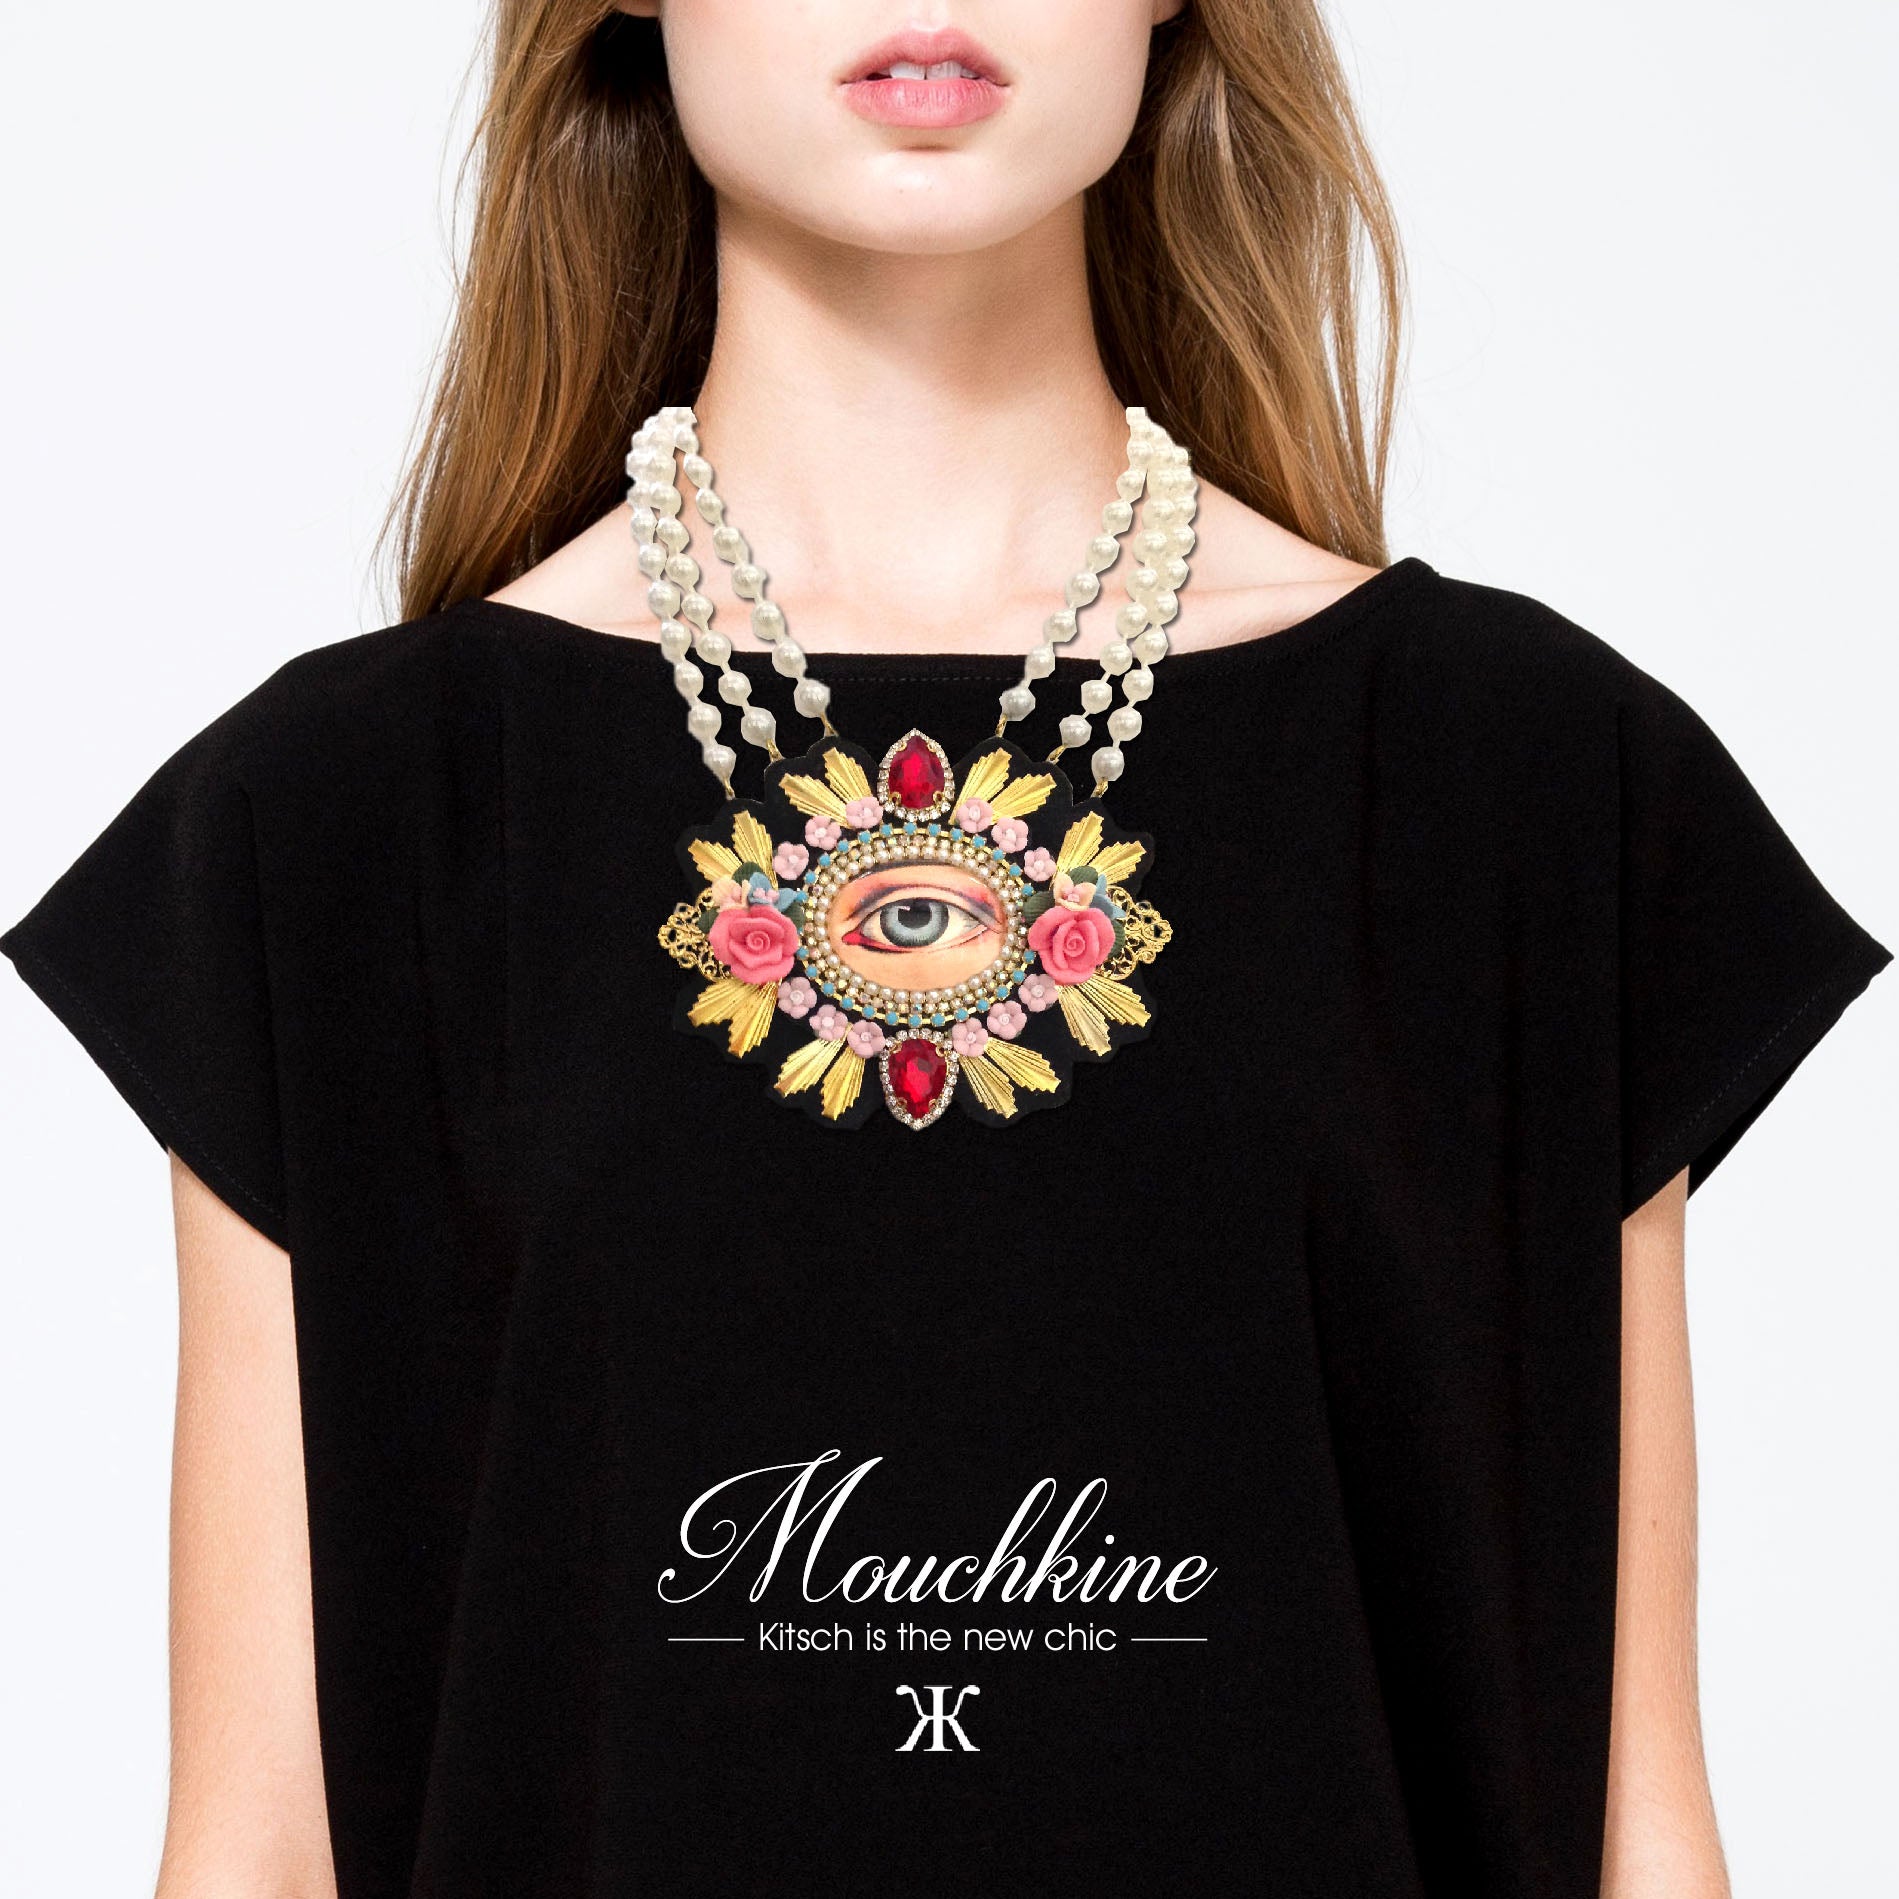 mouchkine jewelry chic and trendy haute couture eye necklace with ceramic flowers